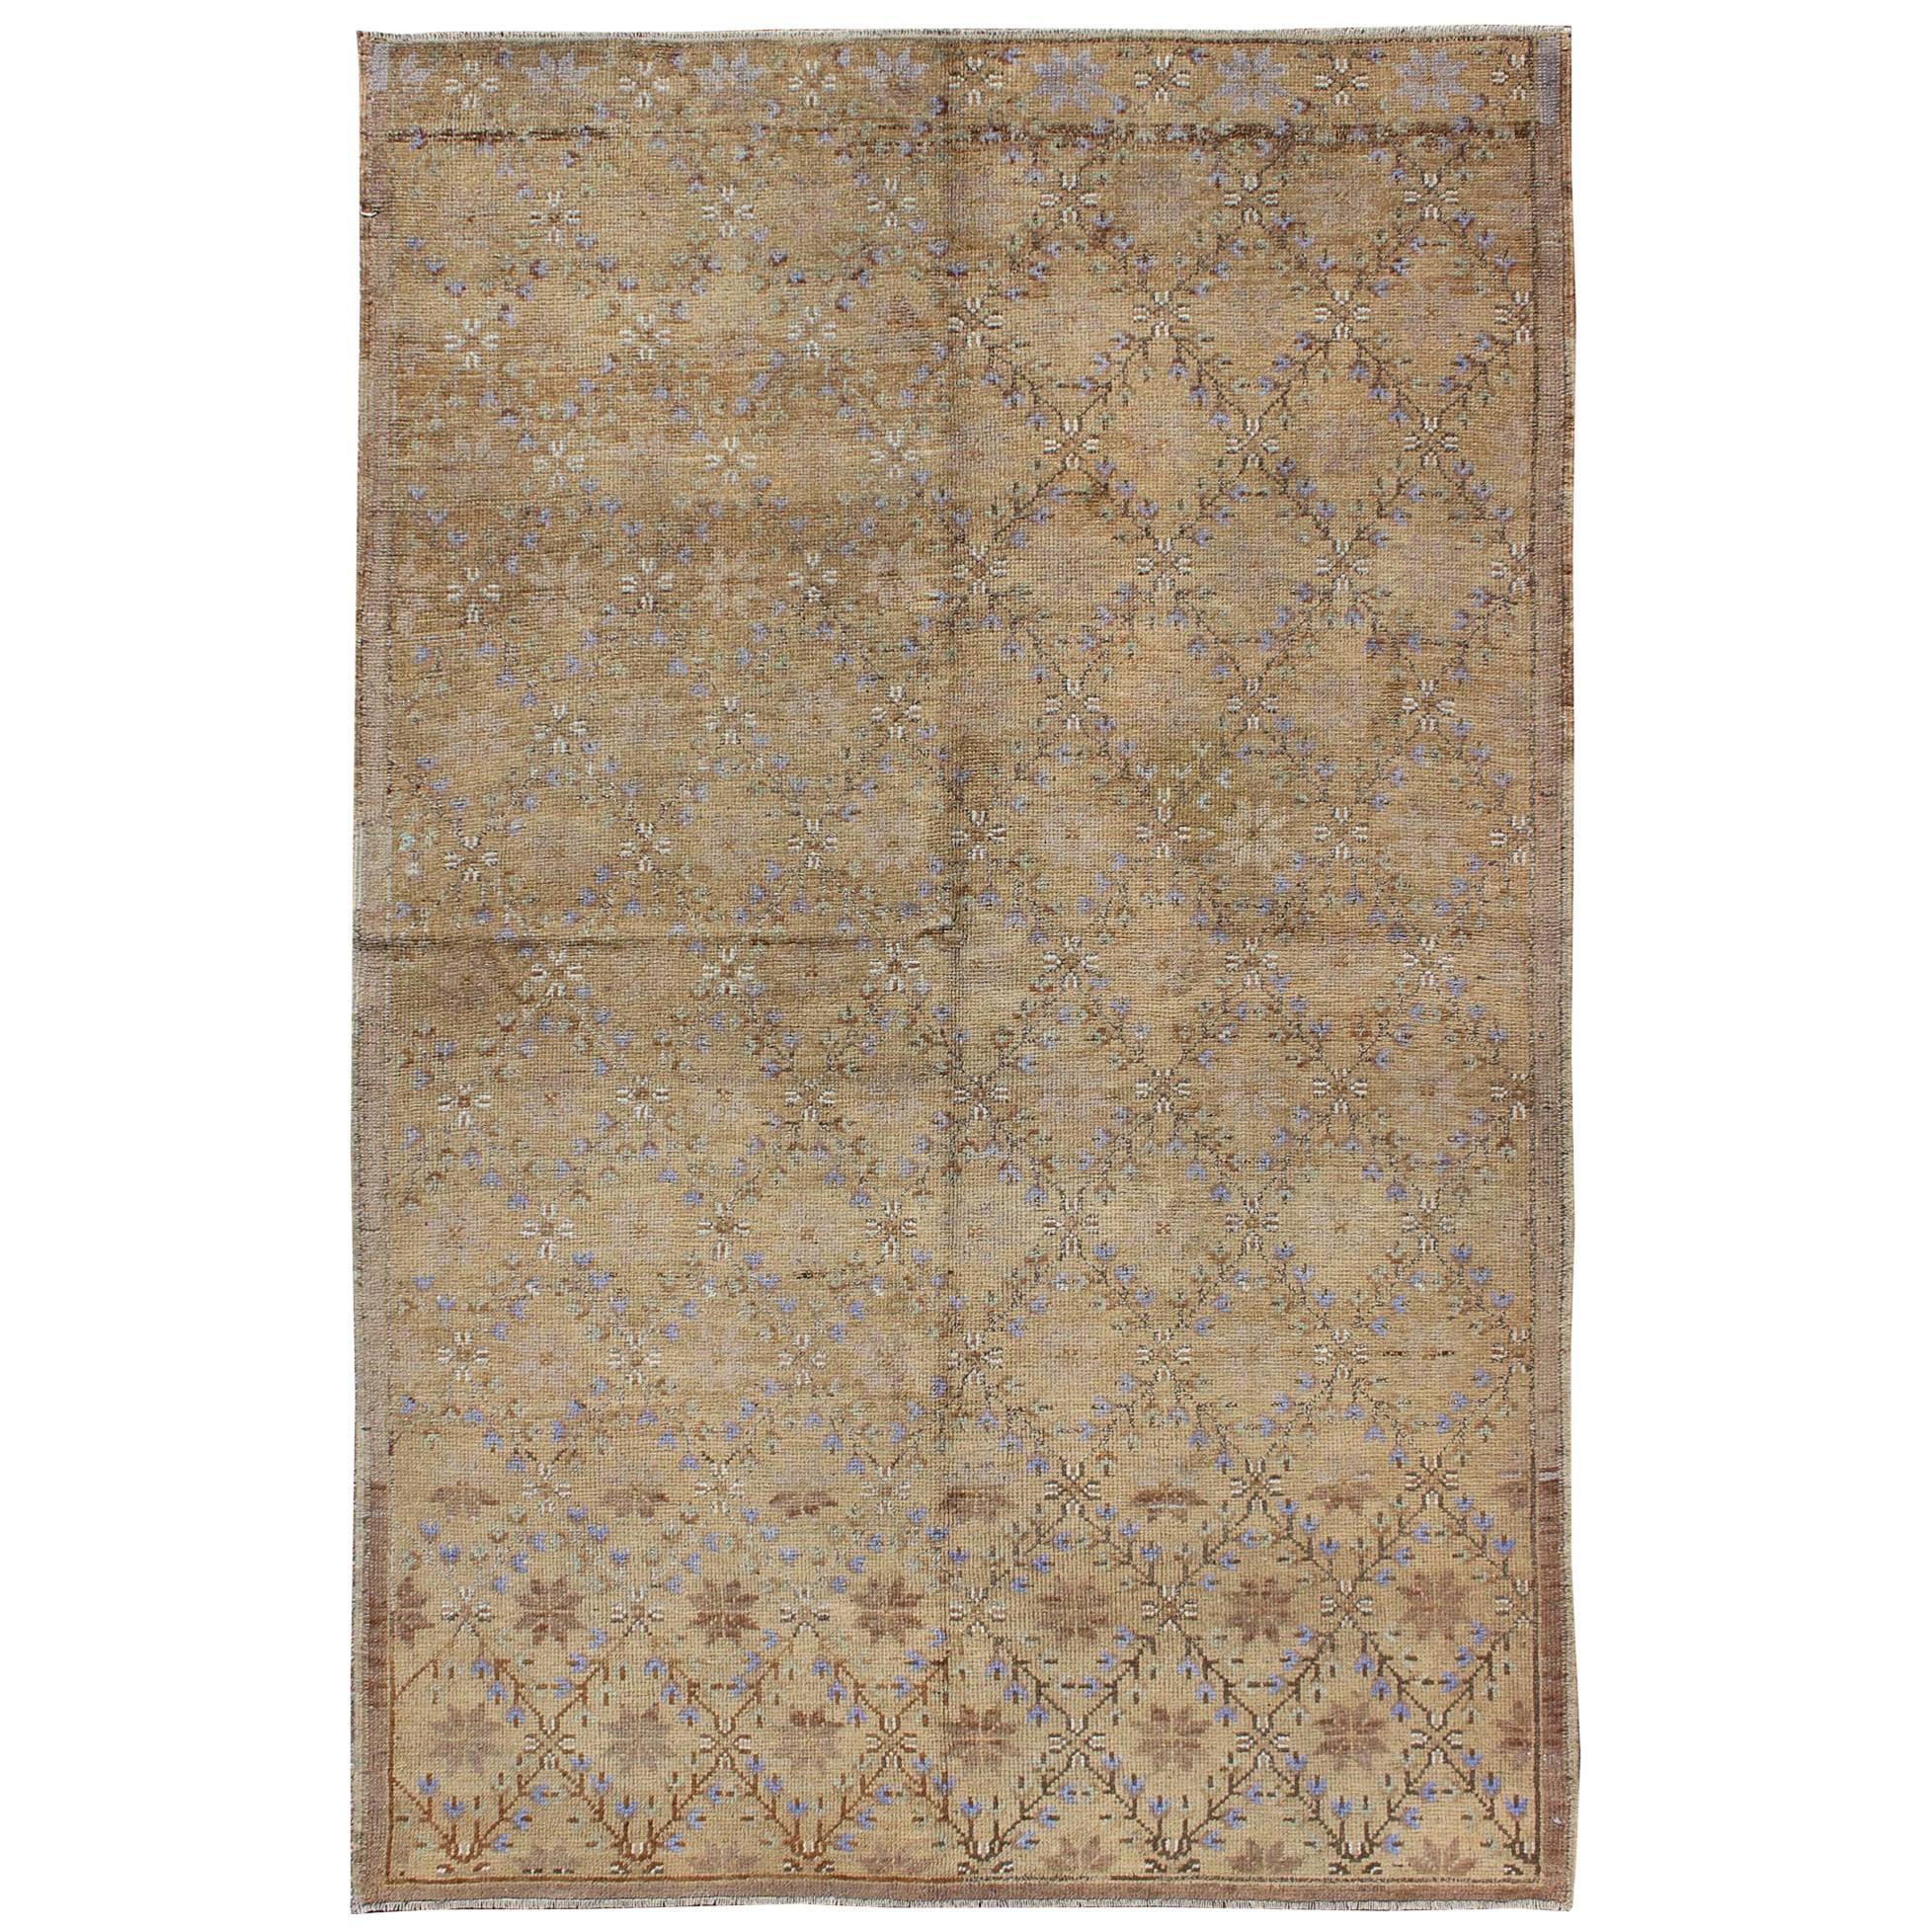 Turkish Oushak Rug with All-Over Design and Neutral Colors; Tan, Taupe, Icy Blue For Sale